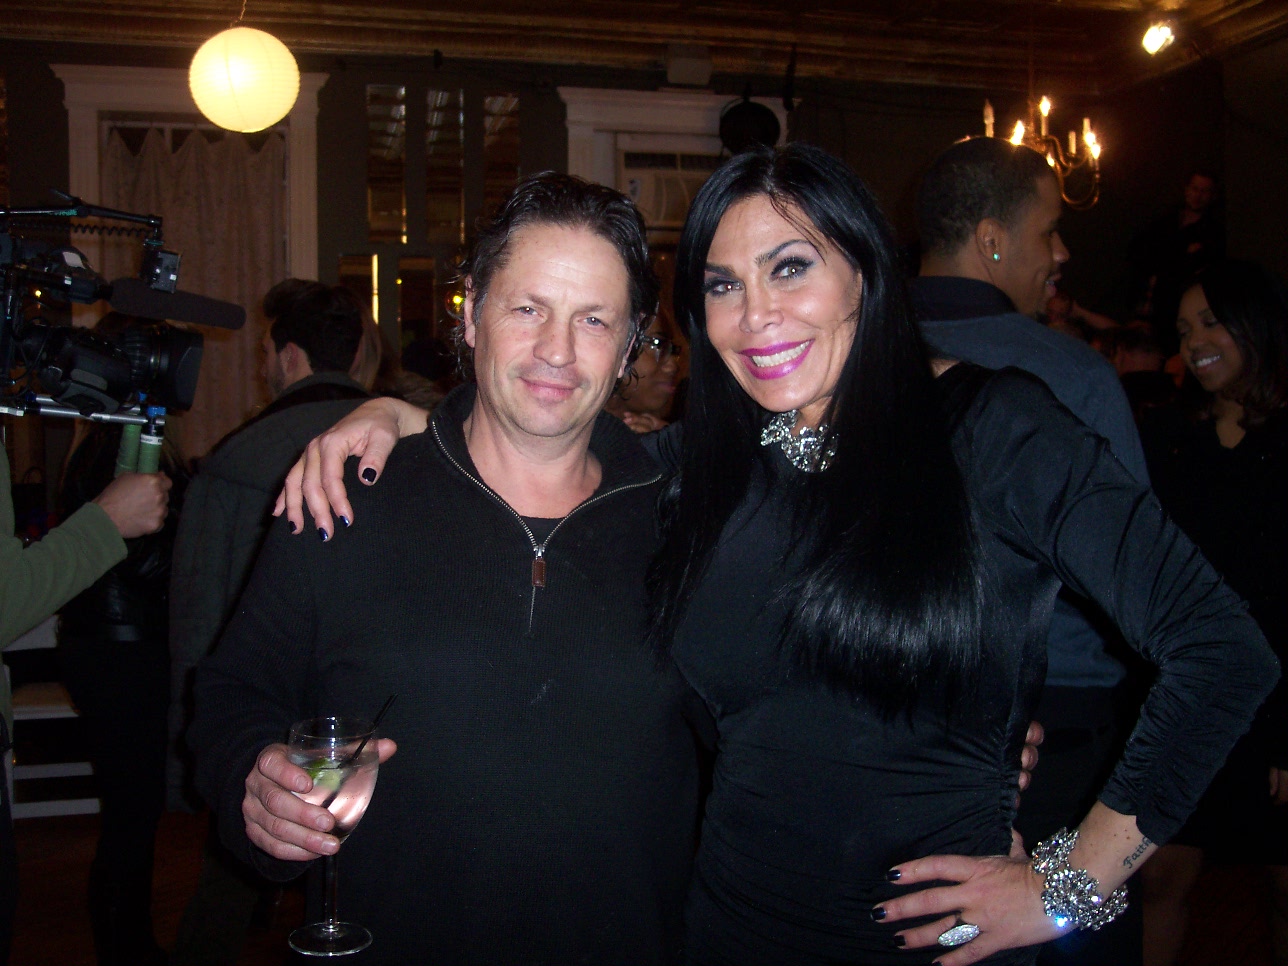 Mob Wives Season Finale Filmed At Edgewater Hall - This Way on Bay